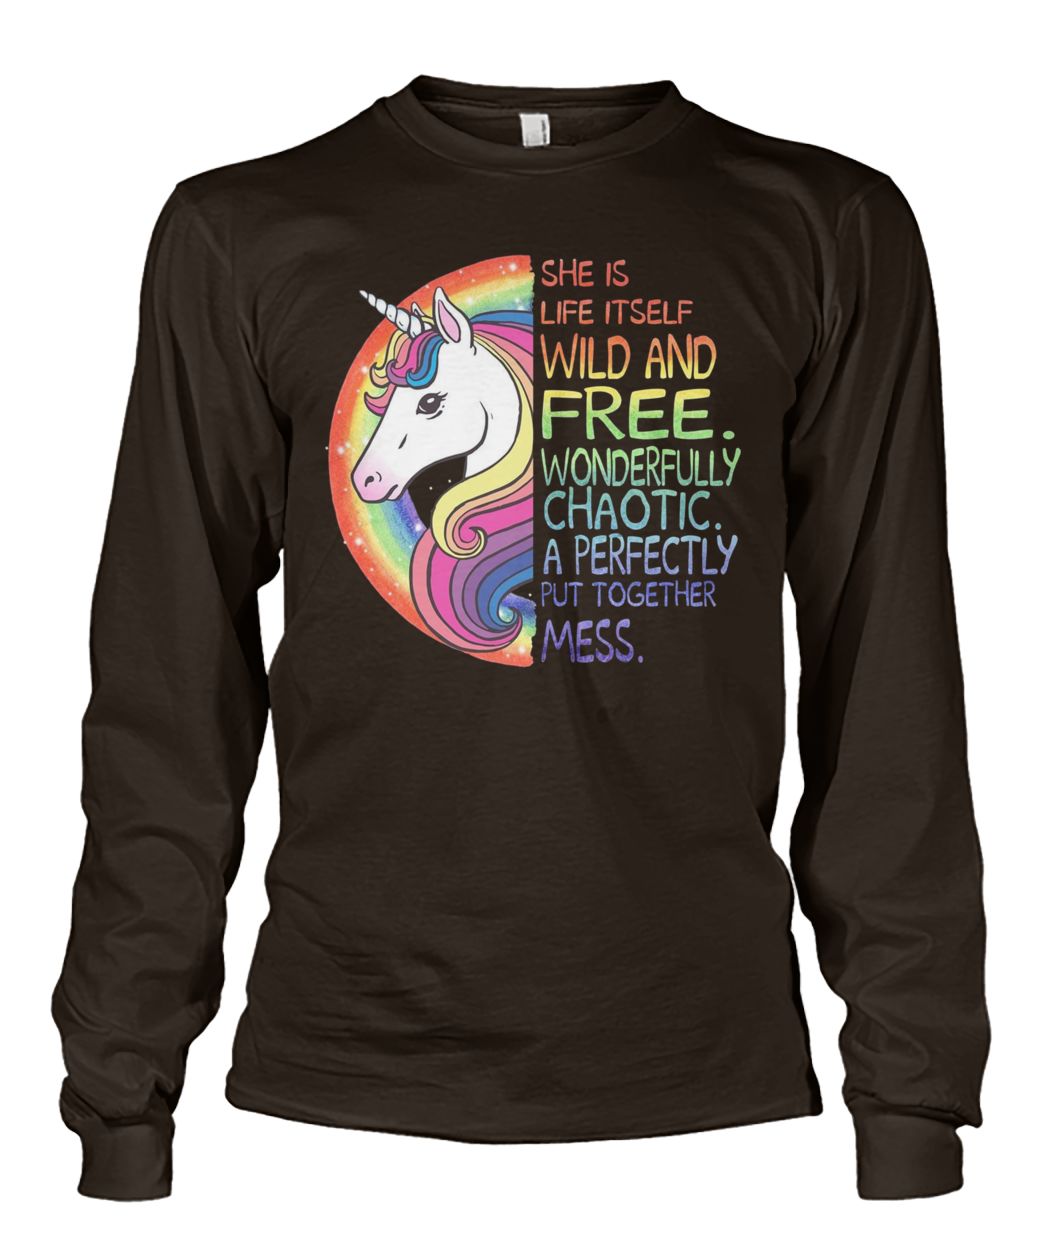 She is life itself wild and free wonderfully chaotic a perfectly put together mess unicorn unisex long sleeve